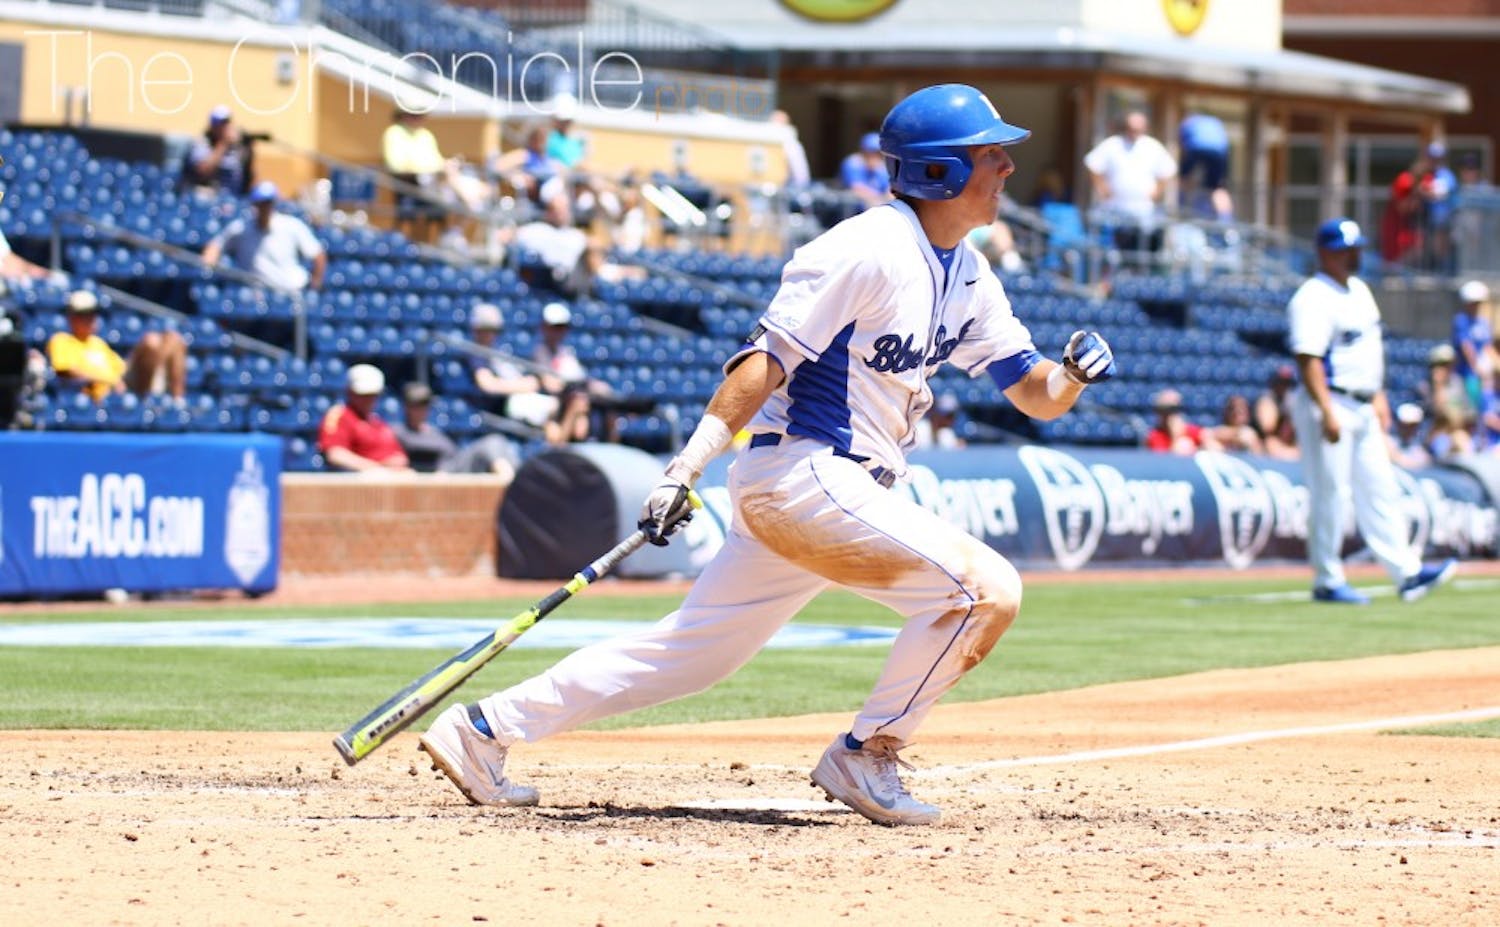 Although Peter Zyla and the Blue Devils capitalized on Wake Forest’s miscues Saturday, they were the ones making mistakes all over the diamond Sunday.